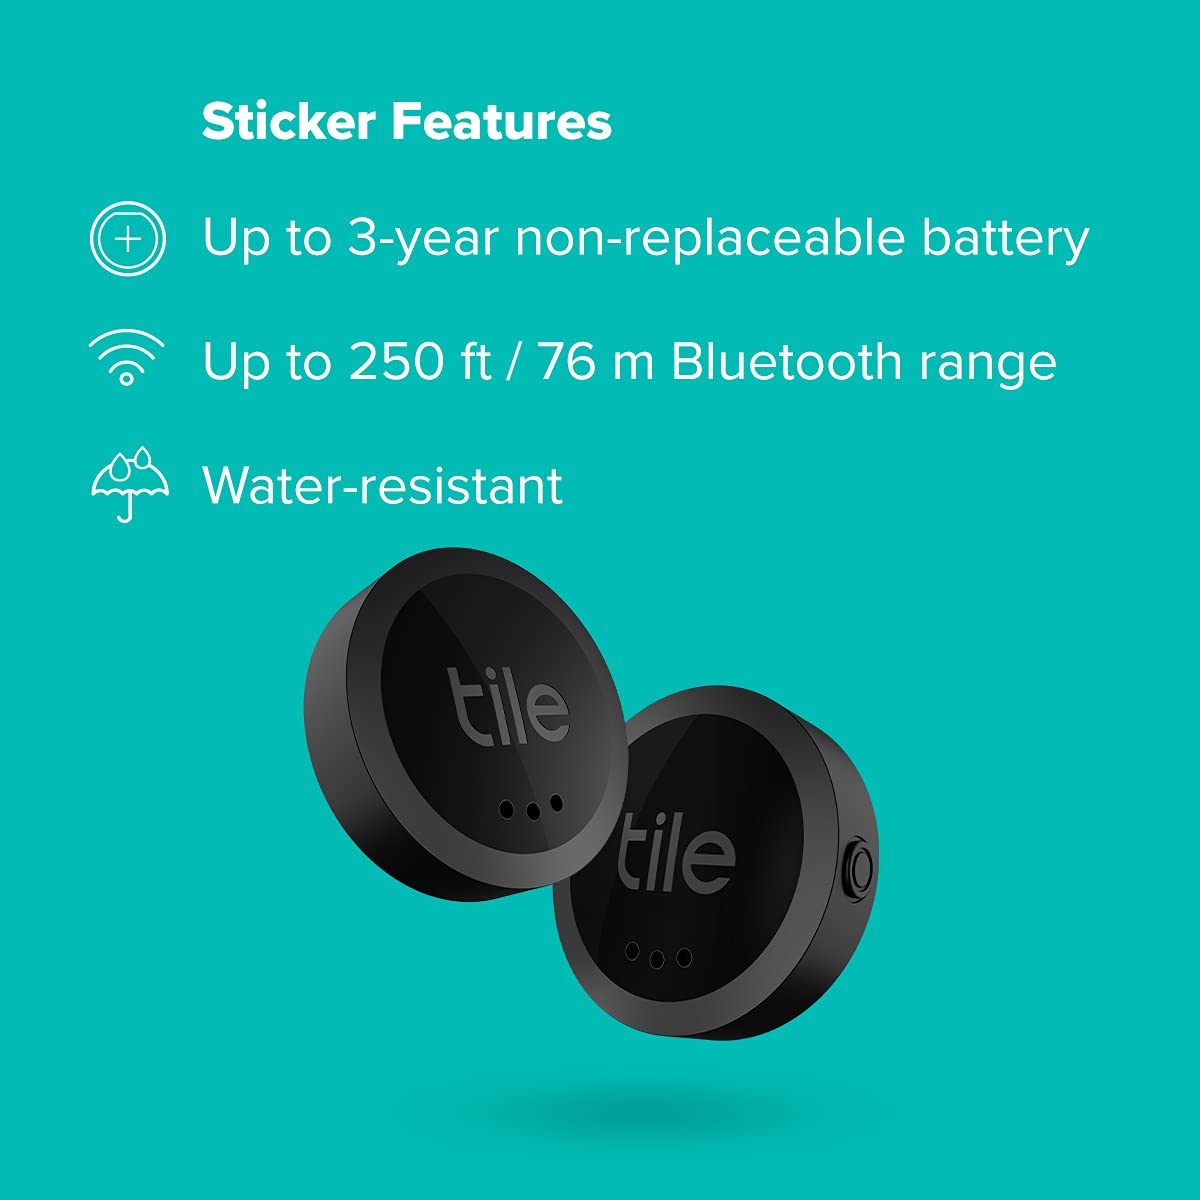 Tile Sticker 2-Pack. Small Bluetooth Tracker, Remote Finder and Item Locator, Pets and More; Up to 250 ft. Range. Water-Resistant. Phone Finder. iOS and Android Compatible.